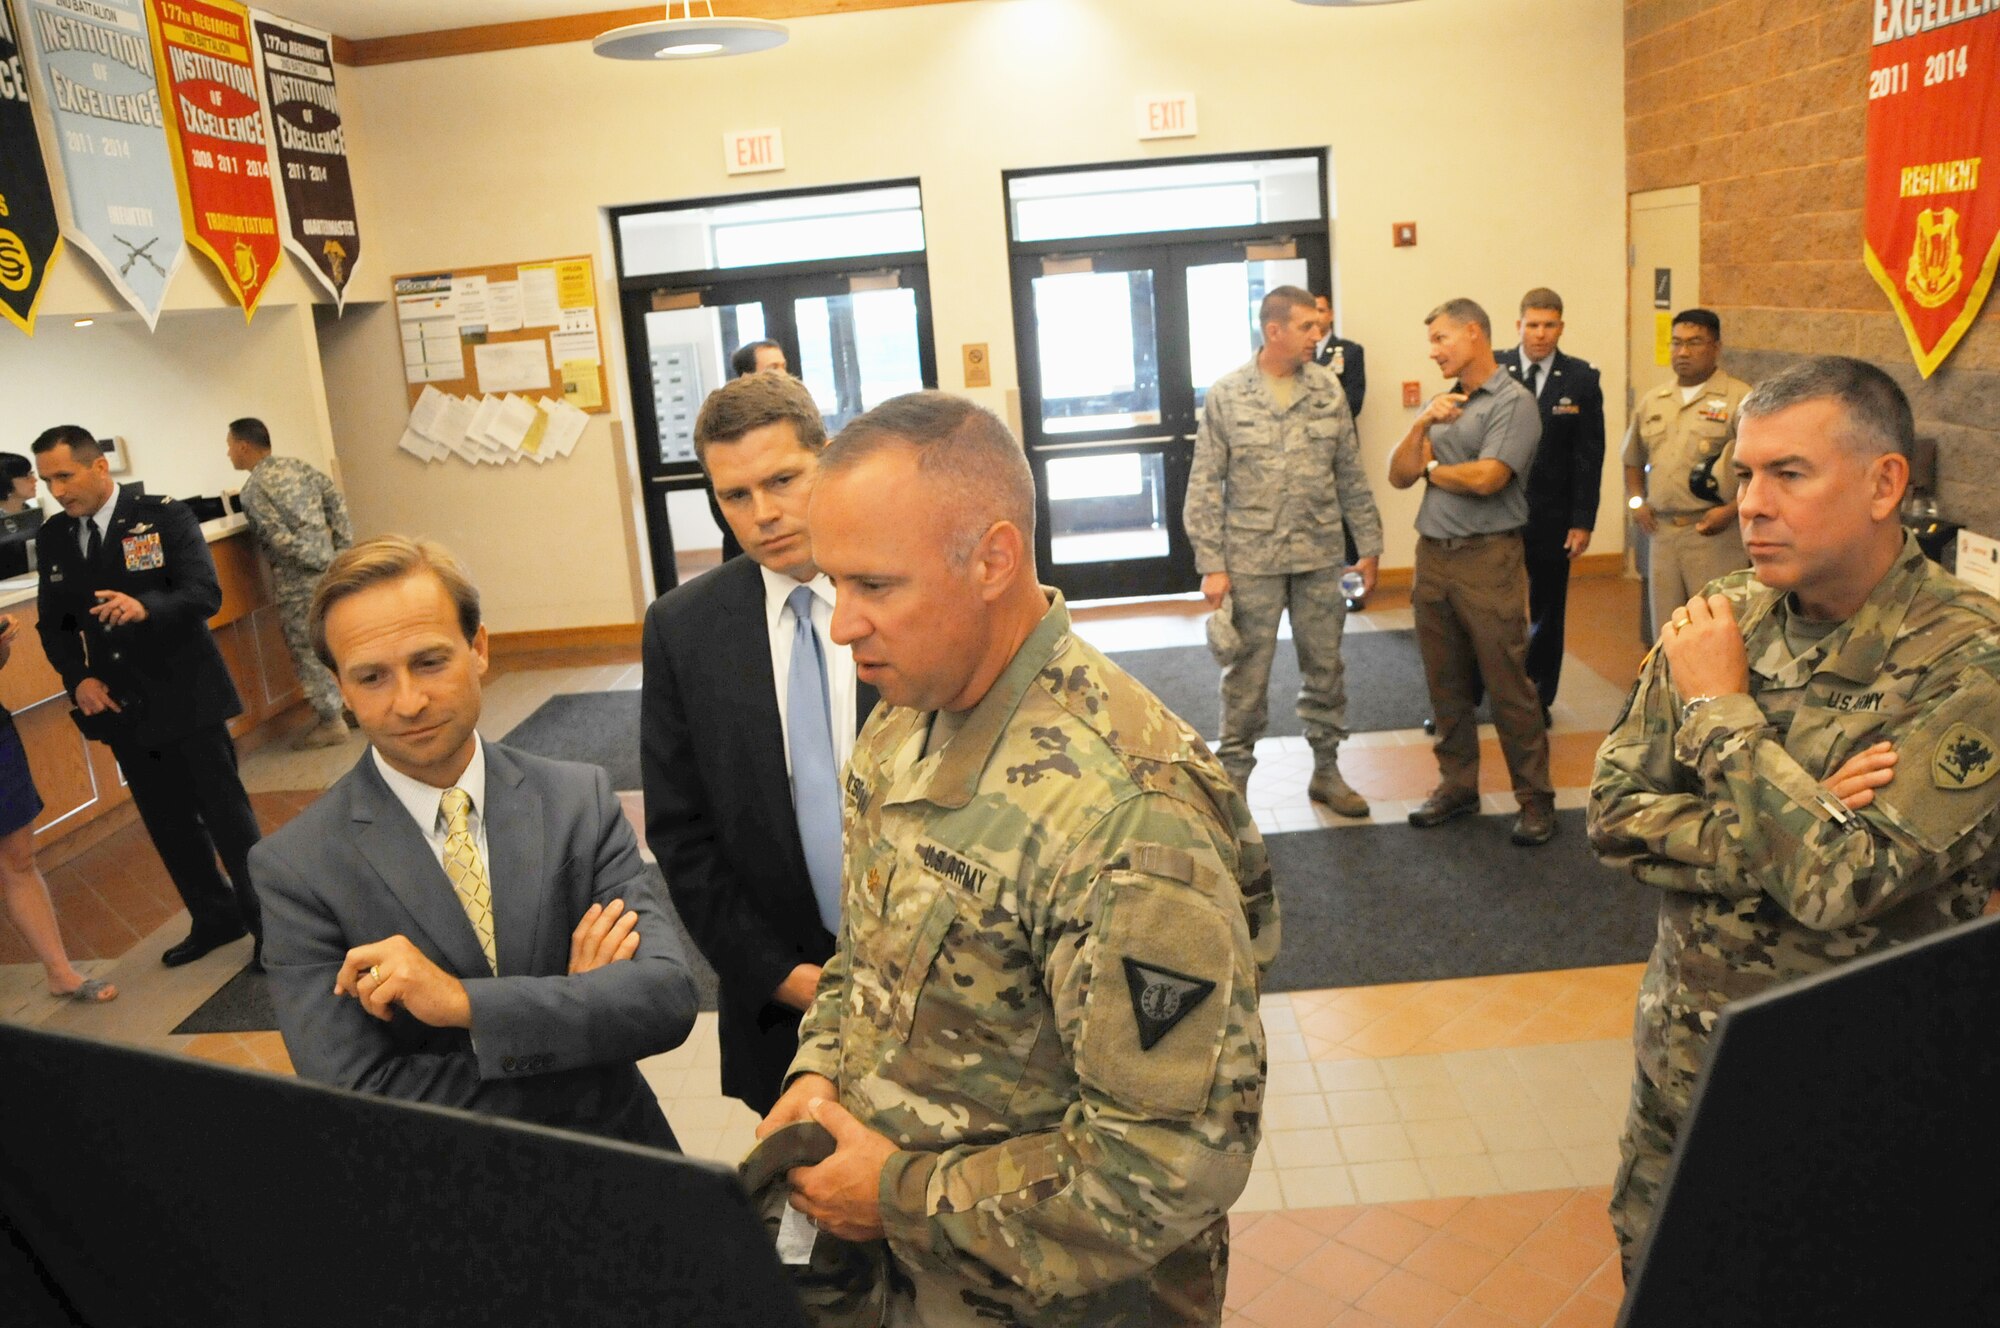 Lt. Gov. Brian Calley visits the 110th Attack Wing, Battle Creek Air National Guard Base and Fort Custer Training Center, Battle Creek, Mich., Monday, August 16, 2016. Lt. Gov. Calley met with 110th Attack Wing Commander, Col. Bryan Teff before traveling to Fort Custer Training Center to meet with Installation Commander, Lt. Col. Steve Wilson and Assistant Adjutant General of Installations, Brig. Gen. Michael Stone.  The purpose of Cally's visit was to highlight the state's strategic plan to protect and grow Michigan's defense and homeland security economy. After returning to the 110th, Calley toured the facilities stopping at the 217th Air Operations Group for a Cyber Operations Squadron mission brief and press conference with Wing Commander, Col. Bryan Teff, Battle Creek Area Chamber of Commerce Representative, Military Affairs, Mr. T.R. Shaw,  and Battle Creek Unlimited Interim President and CEO, Mr. Joe Sobieralski. (Air National Guard photo by Master Sgt. Sonia Pawloski/released)